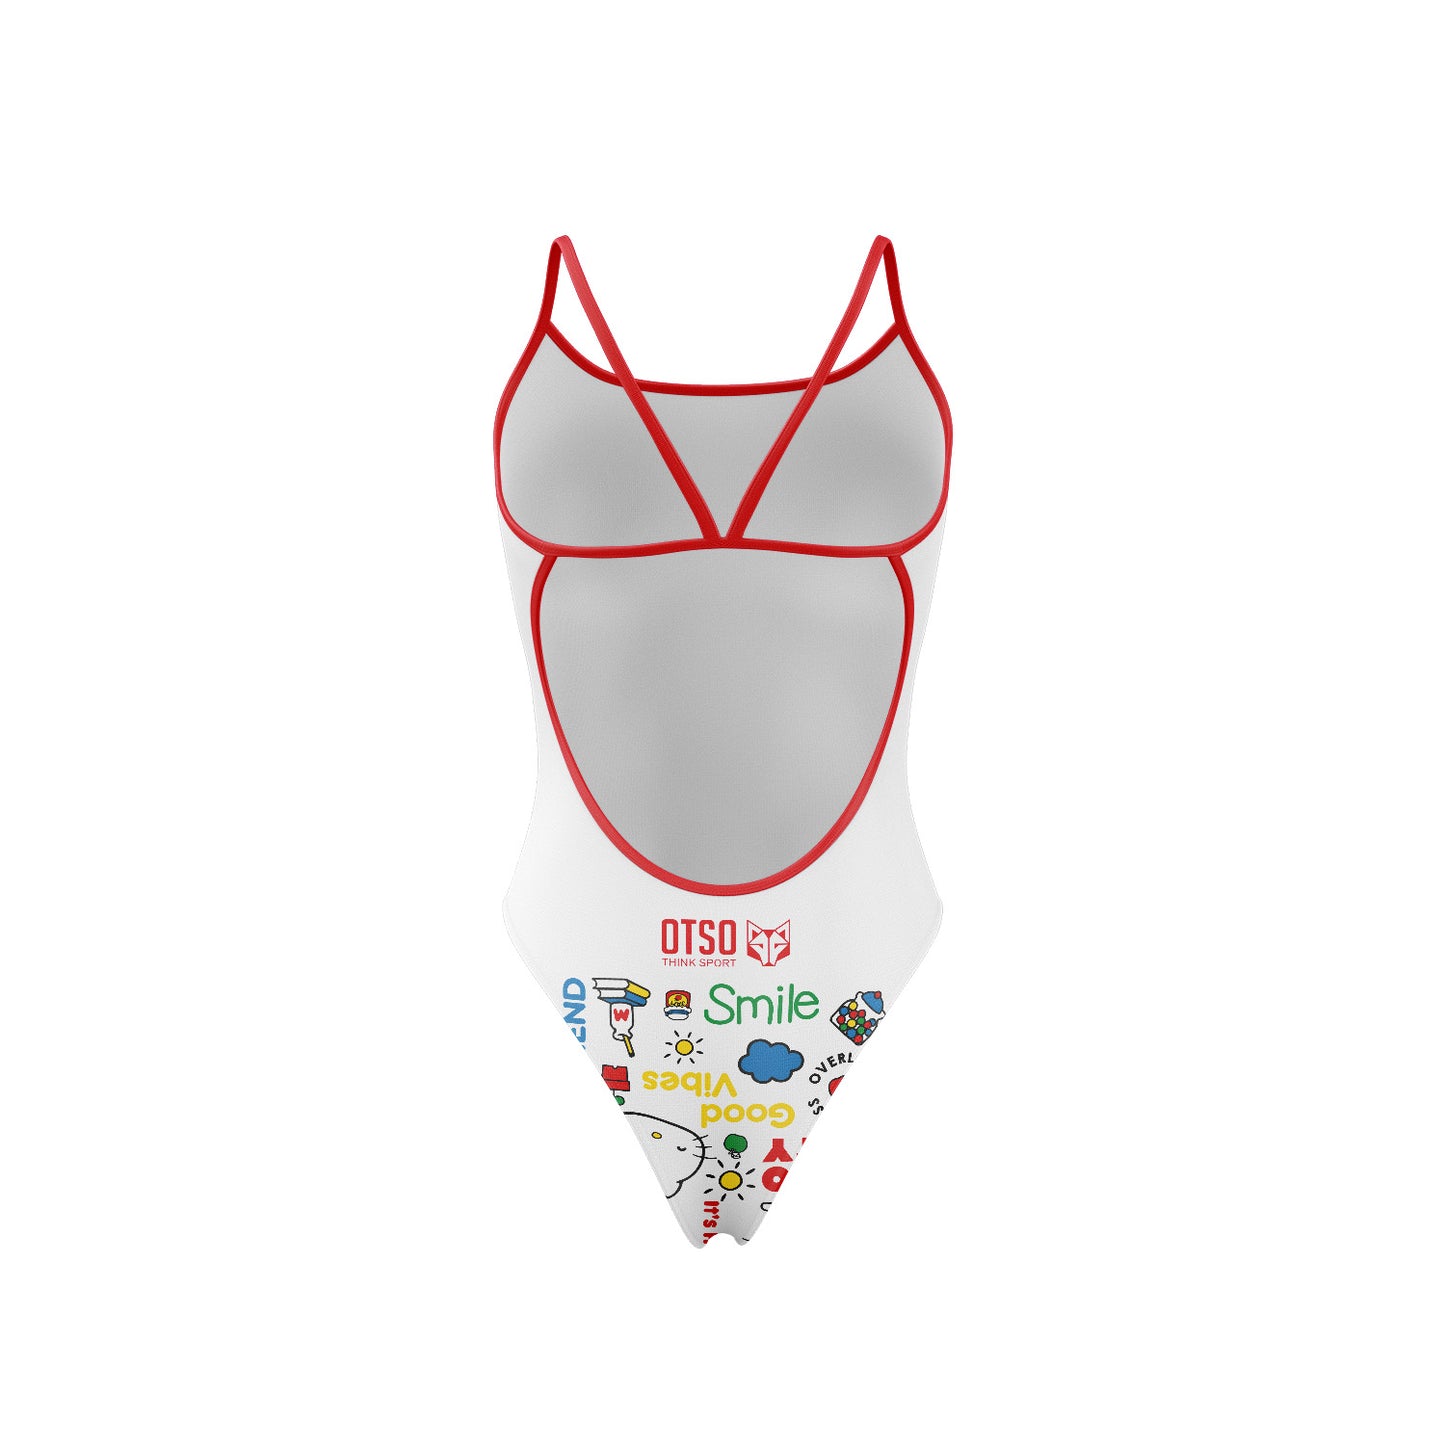 Girls and women's swimsuit - Hello Kitty Smile